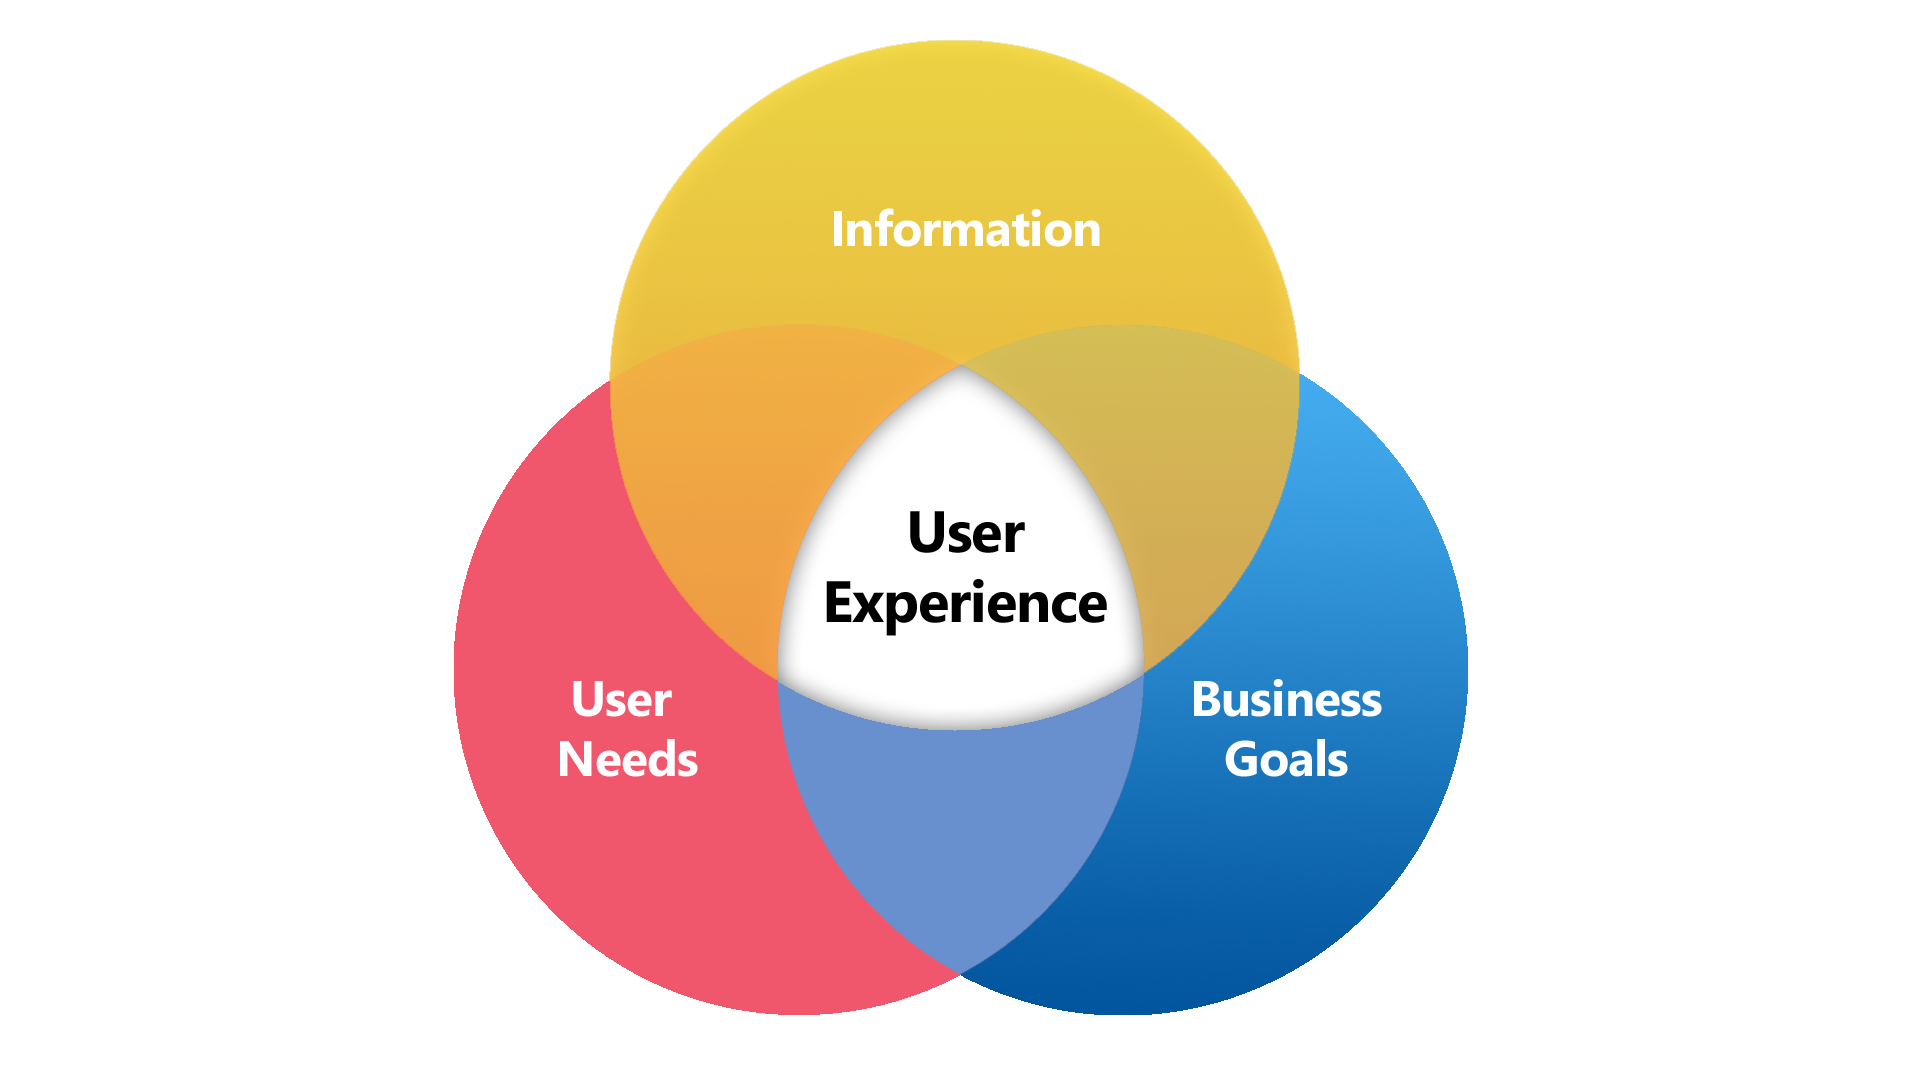 The rules of User Experience